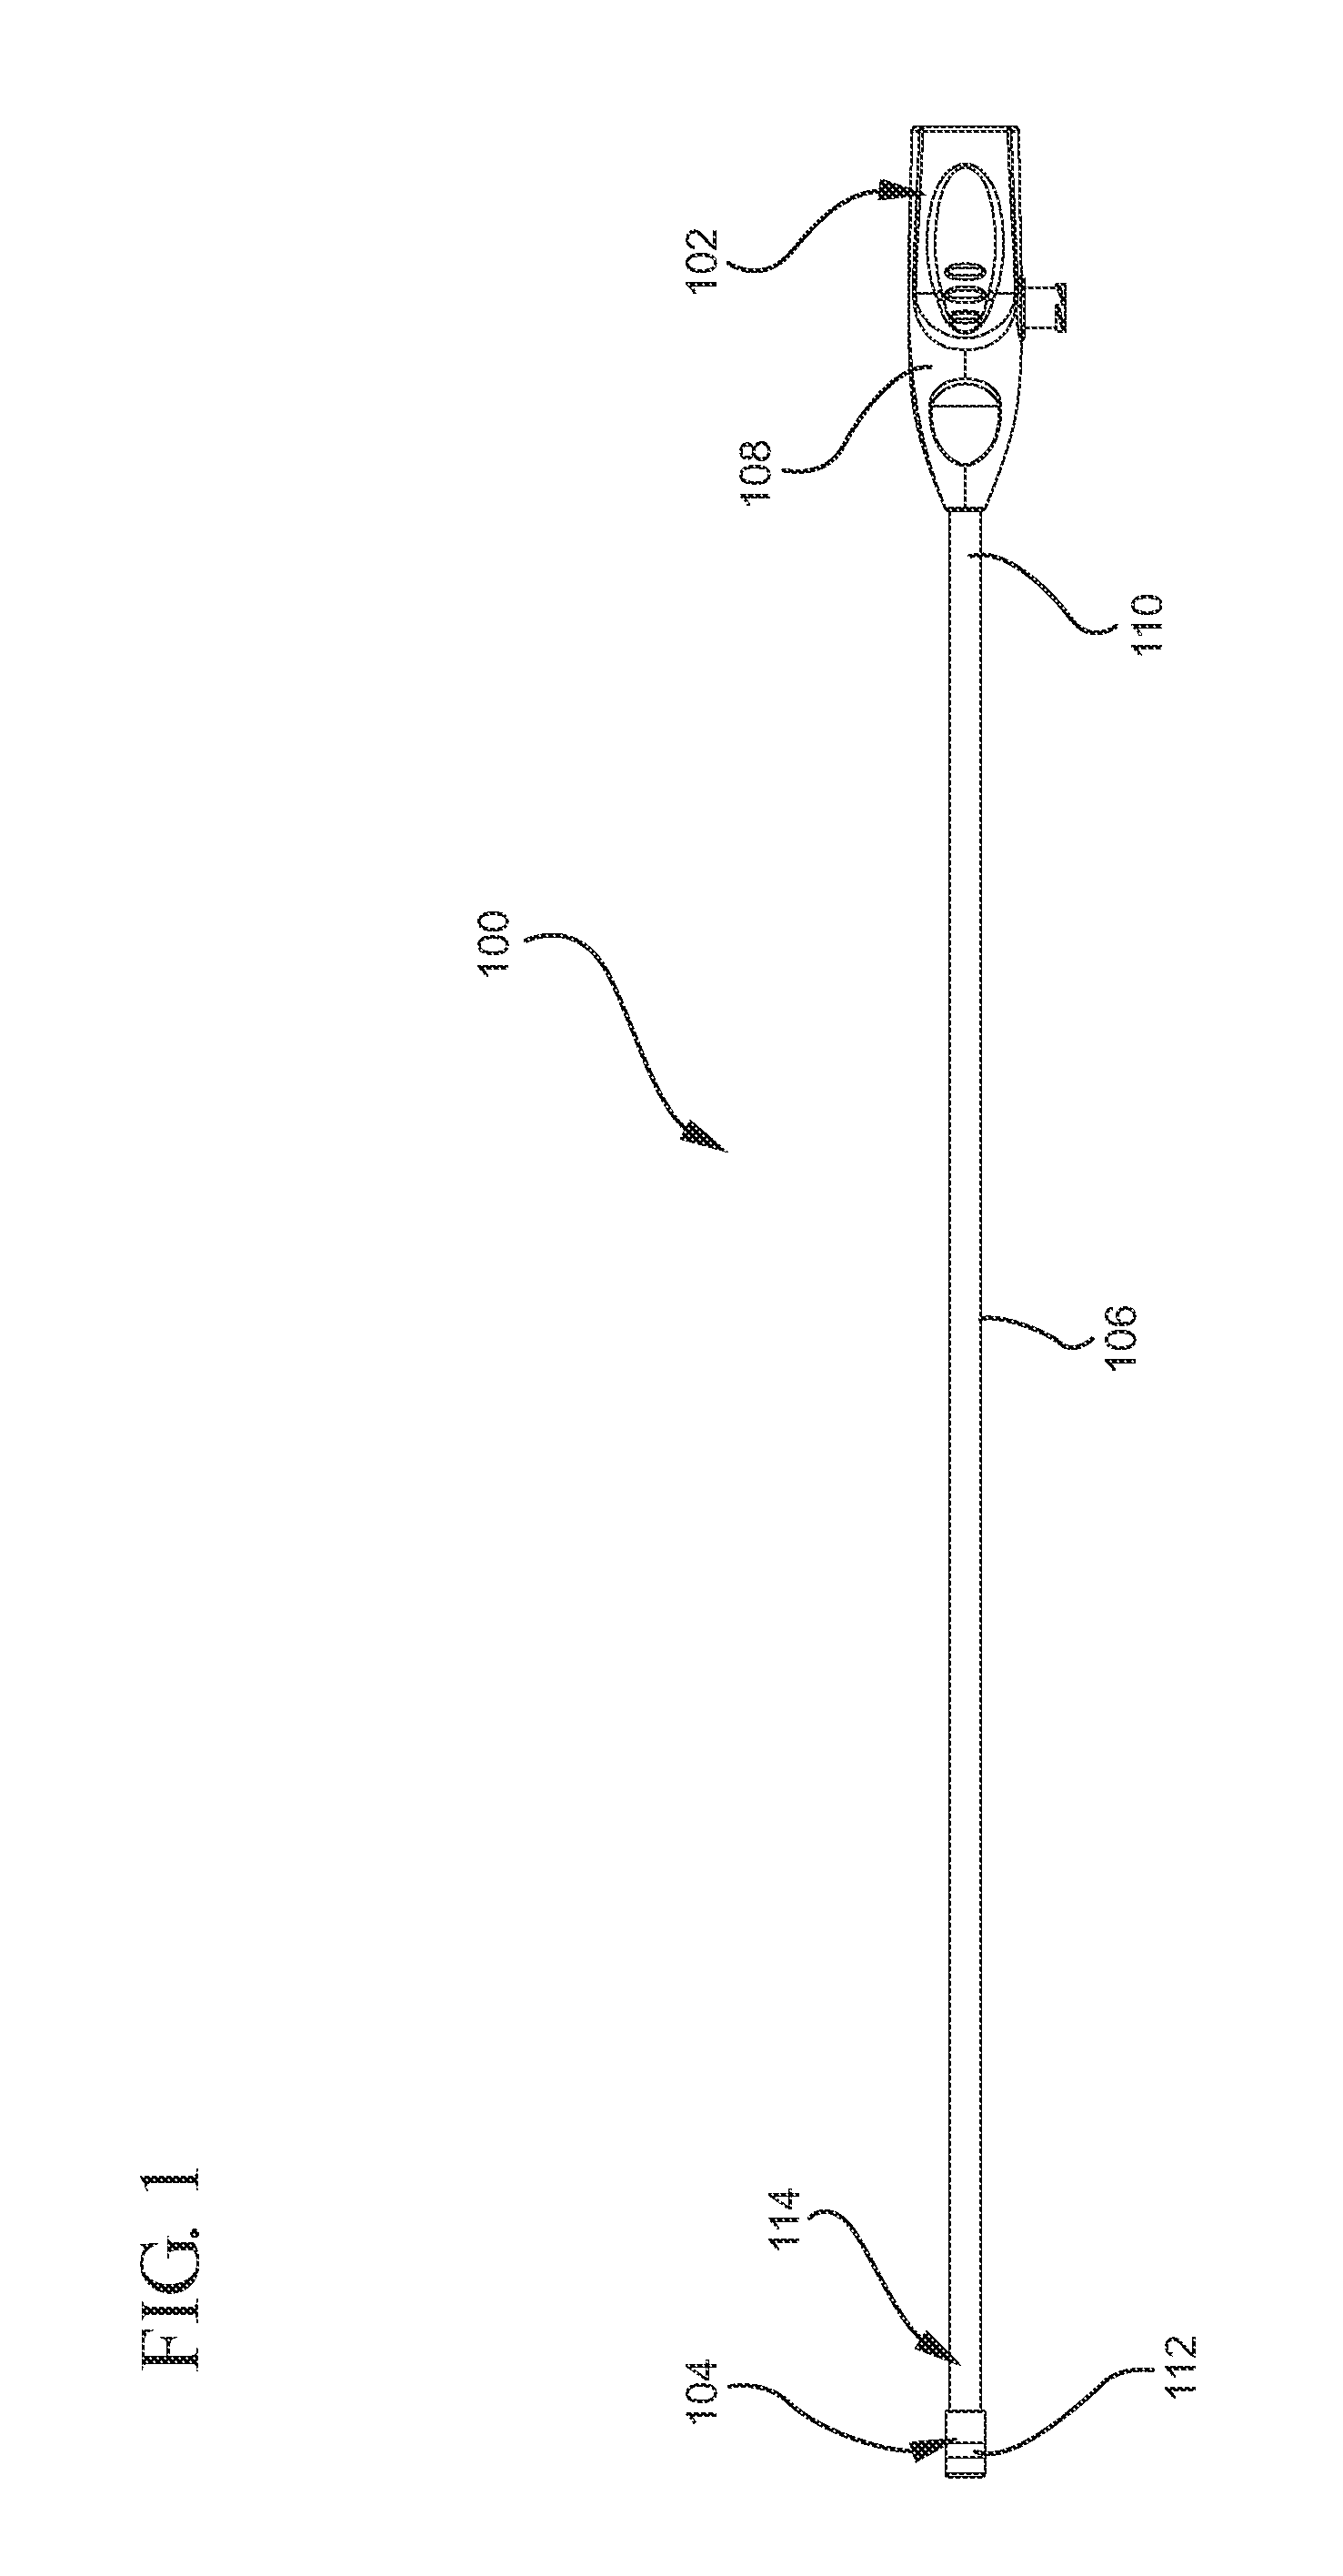 Applicator instruments for controlling bleeding at surgical sites and methods therefor